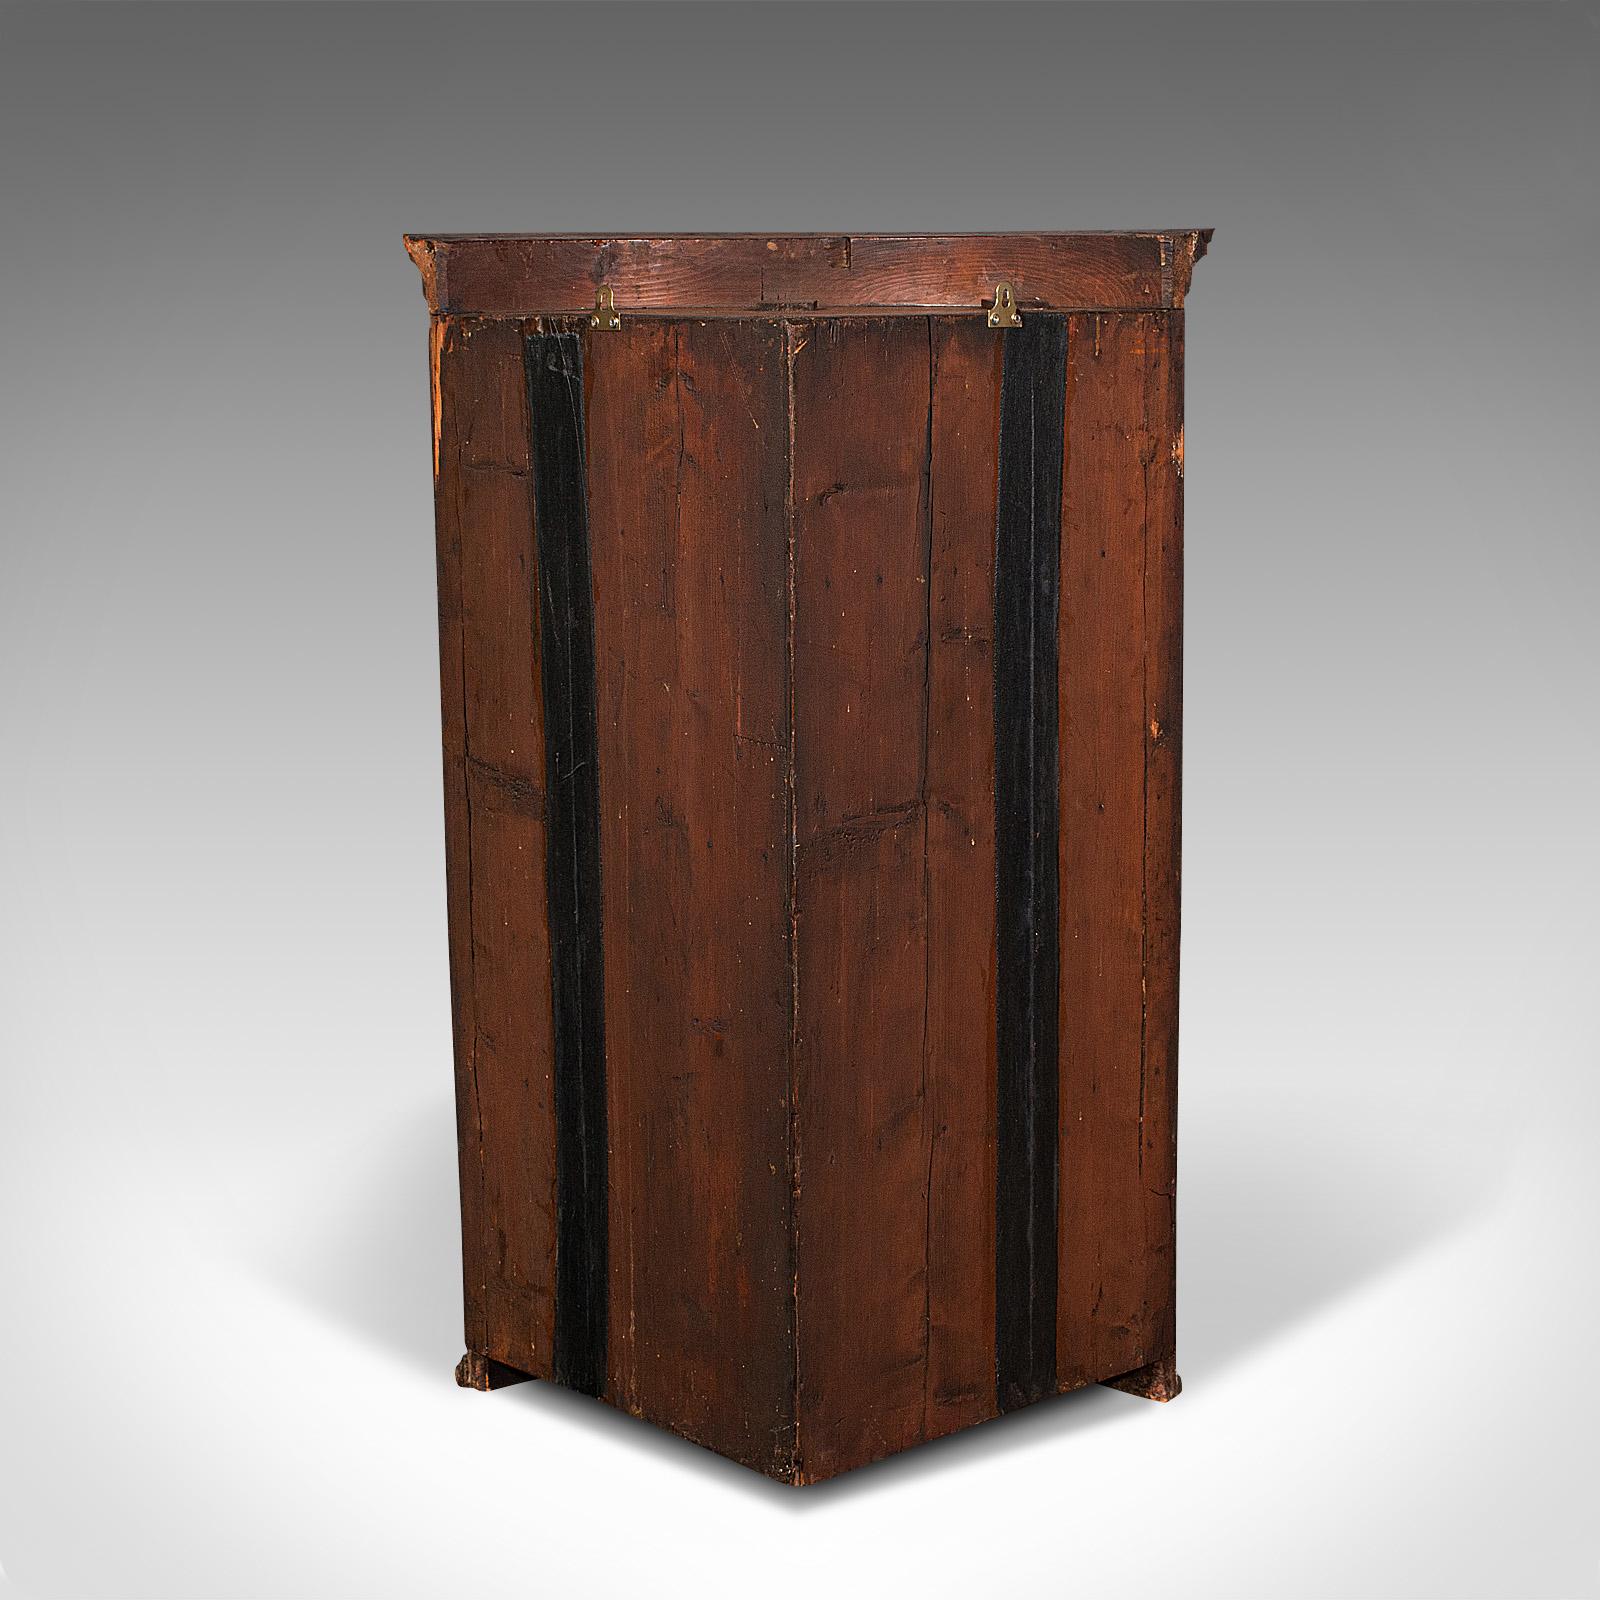 British Antique Corner Cabinet, English, Bow Front, Hanging Cupboard, Georgian, C.1780 For Sale